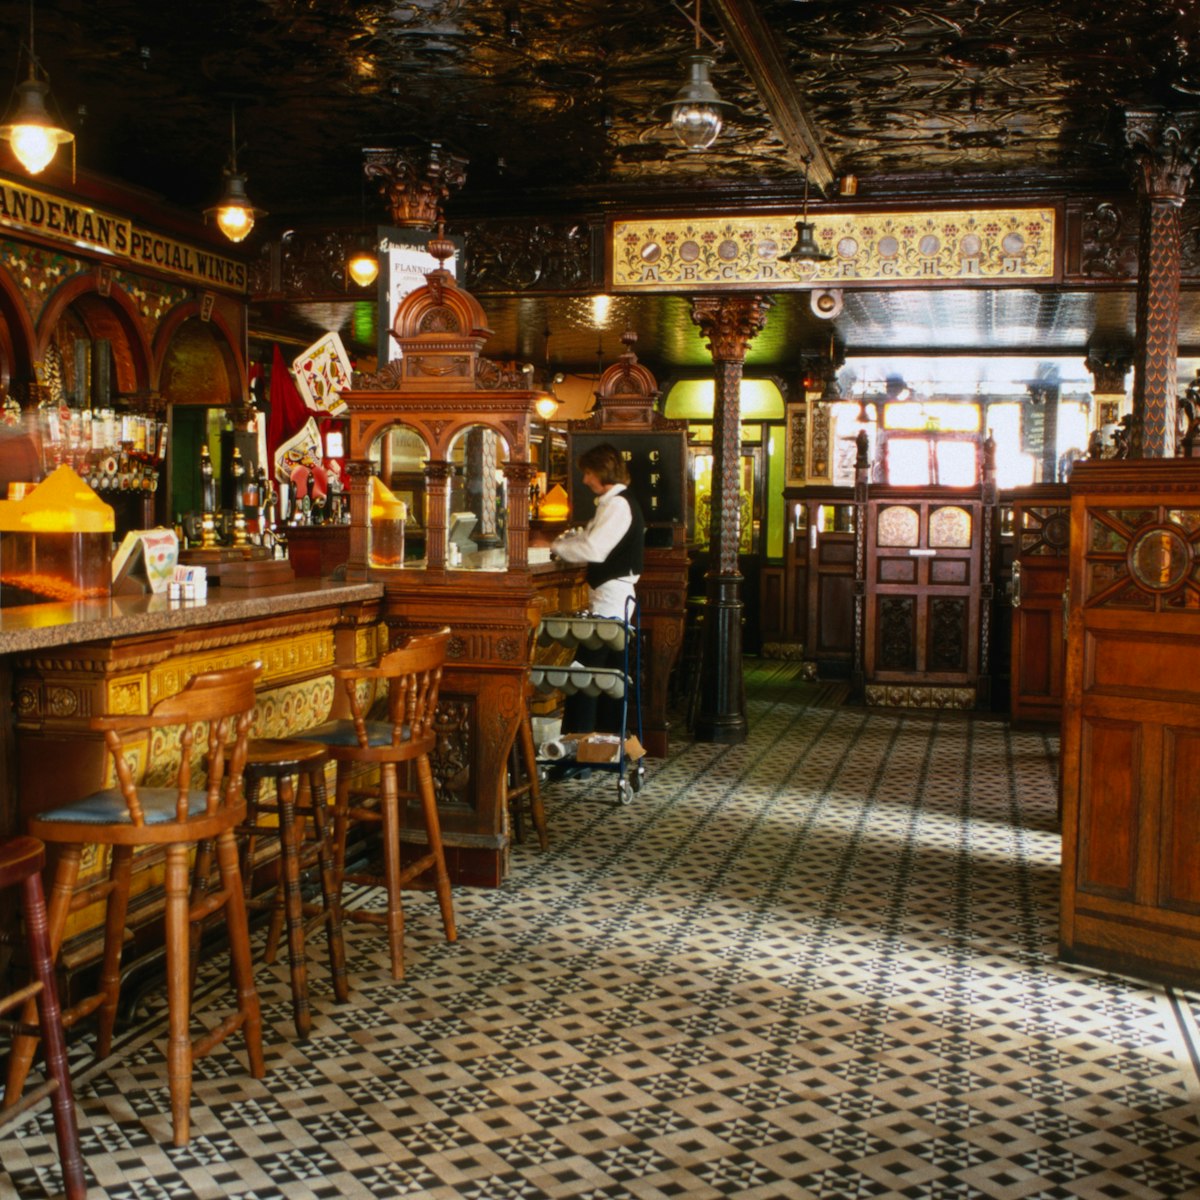 Interior of the Crown Liquor Saloon bar area which features ornate glass, tile and wooden decoration and furnishings, Belfast.